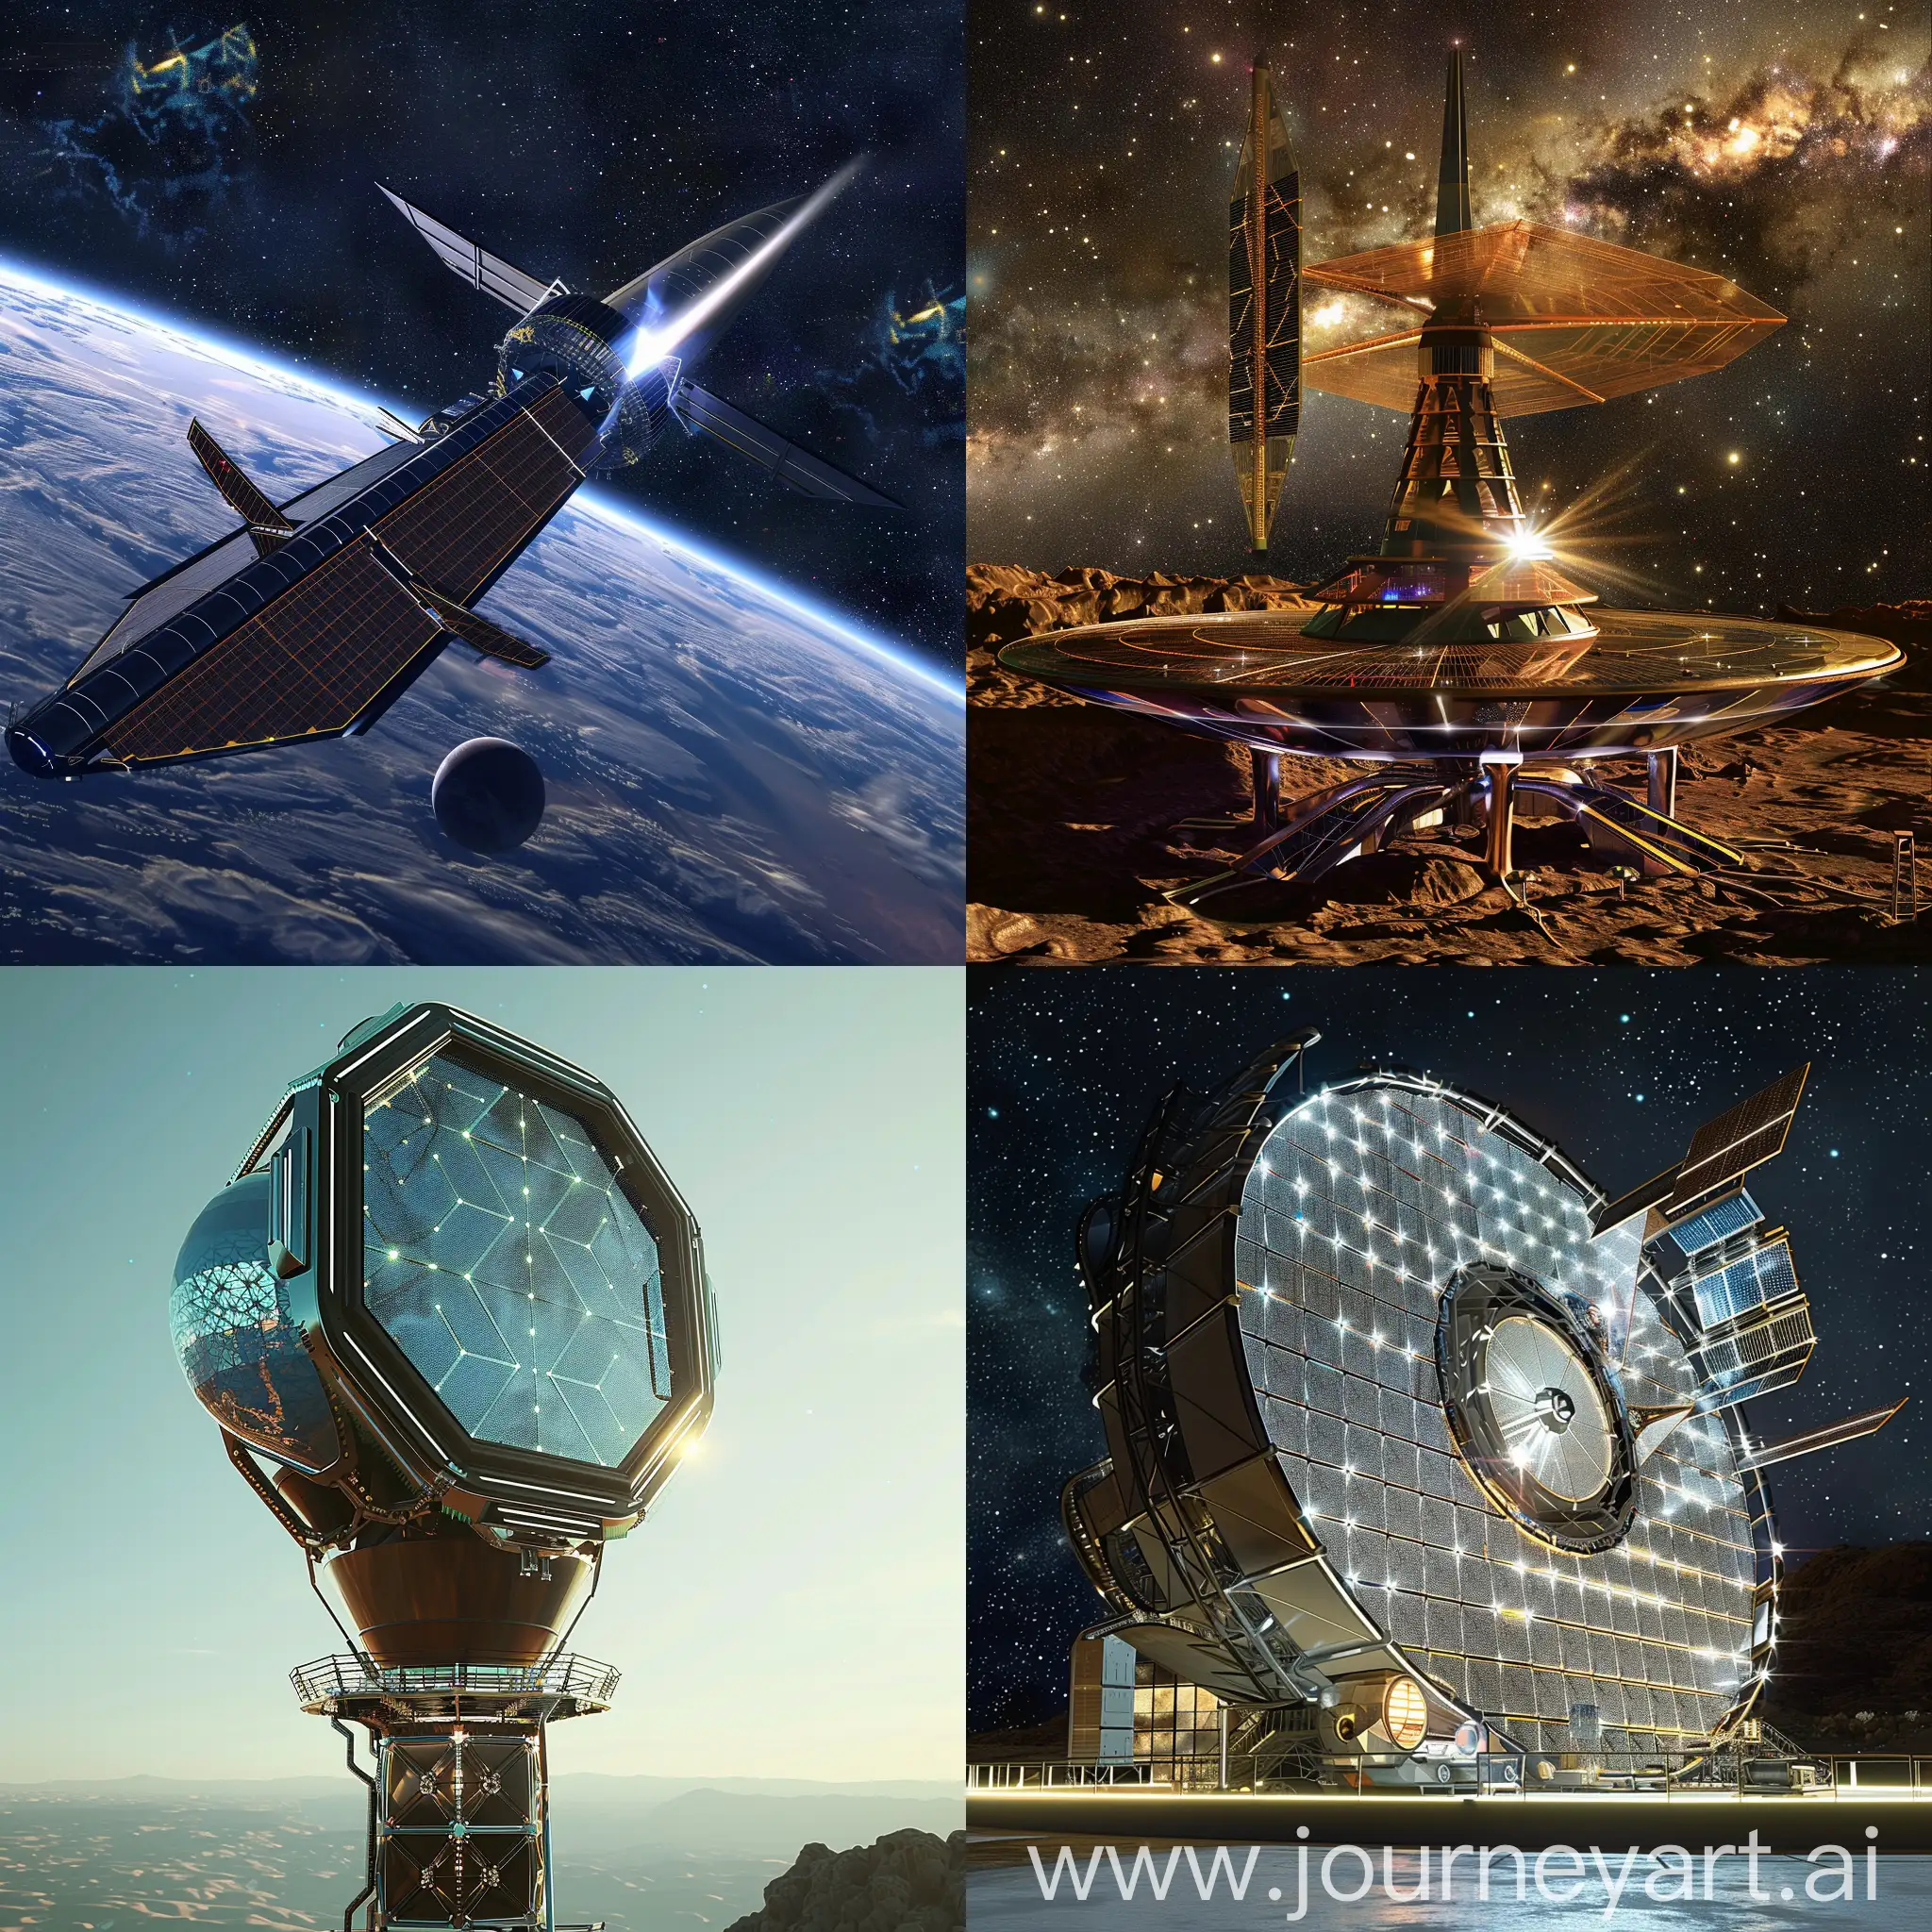 Futuristic space telescope, Advanced Optics, Enhanced Detectors, Quantum Computing, Artificial Intelligence, Nano-technology, Energy Harvesting, Thermal Control, Miniaturization, Communication Systems, Robotic Maintenance, Solar Sail, Radiation Shielding, Aerogel Insulation, Self-cleaning Surfaces, Modular Design, Holographic Star Tracker, Magnetic Field Generators, Shape Memory Alloys, Electrochromic Windows, Vibration Dampening Systems, in unreal engine 5 style --stylize 1000